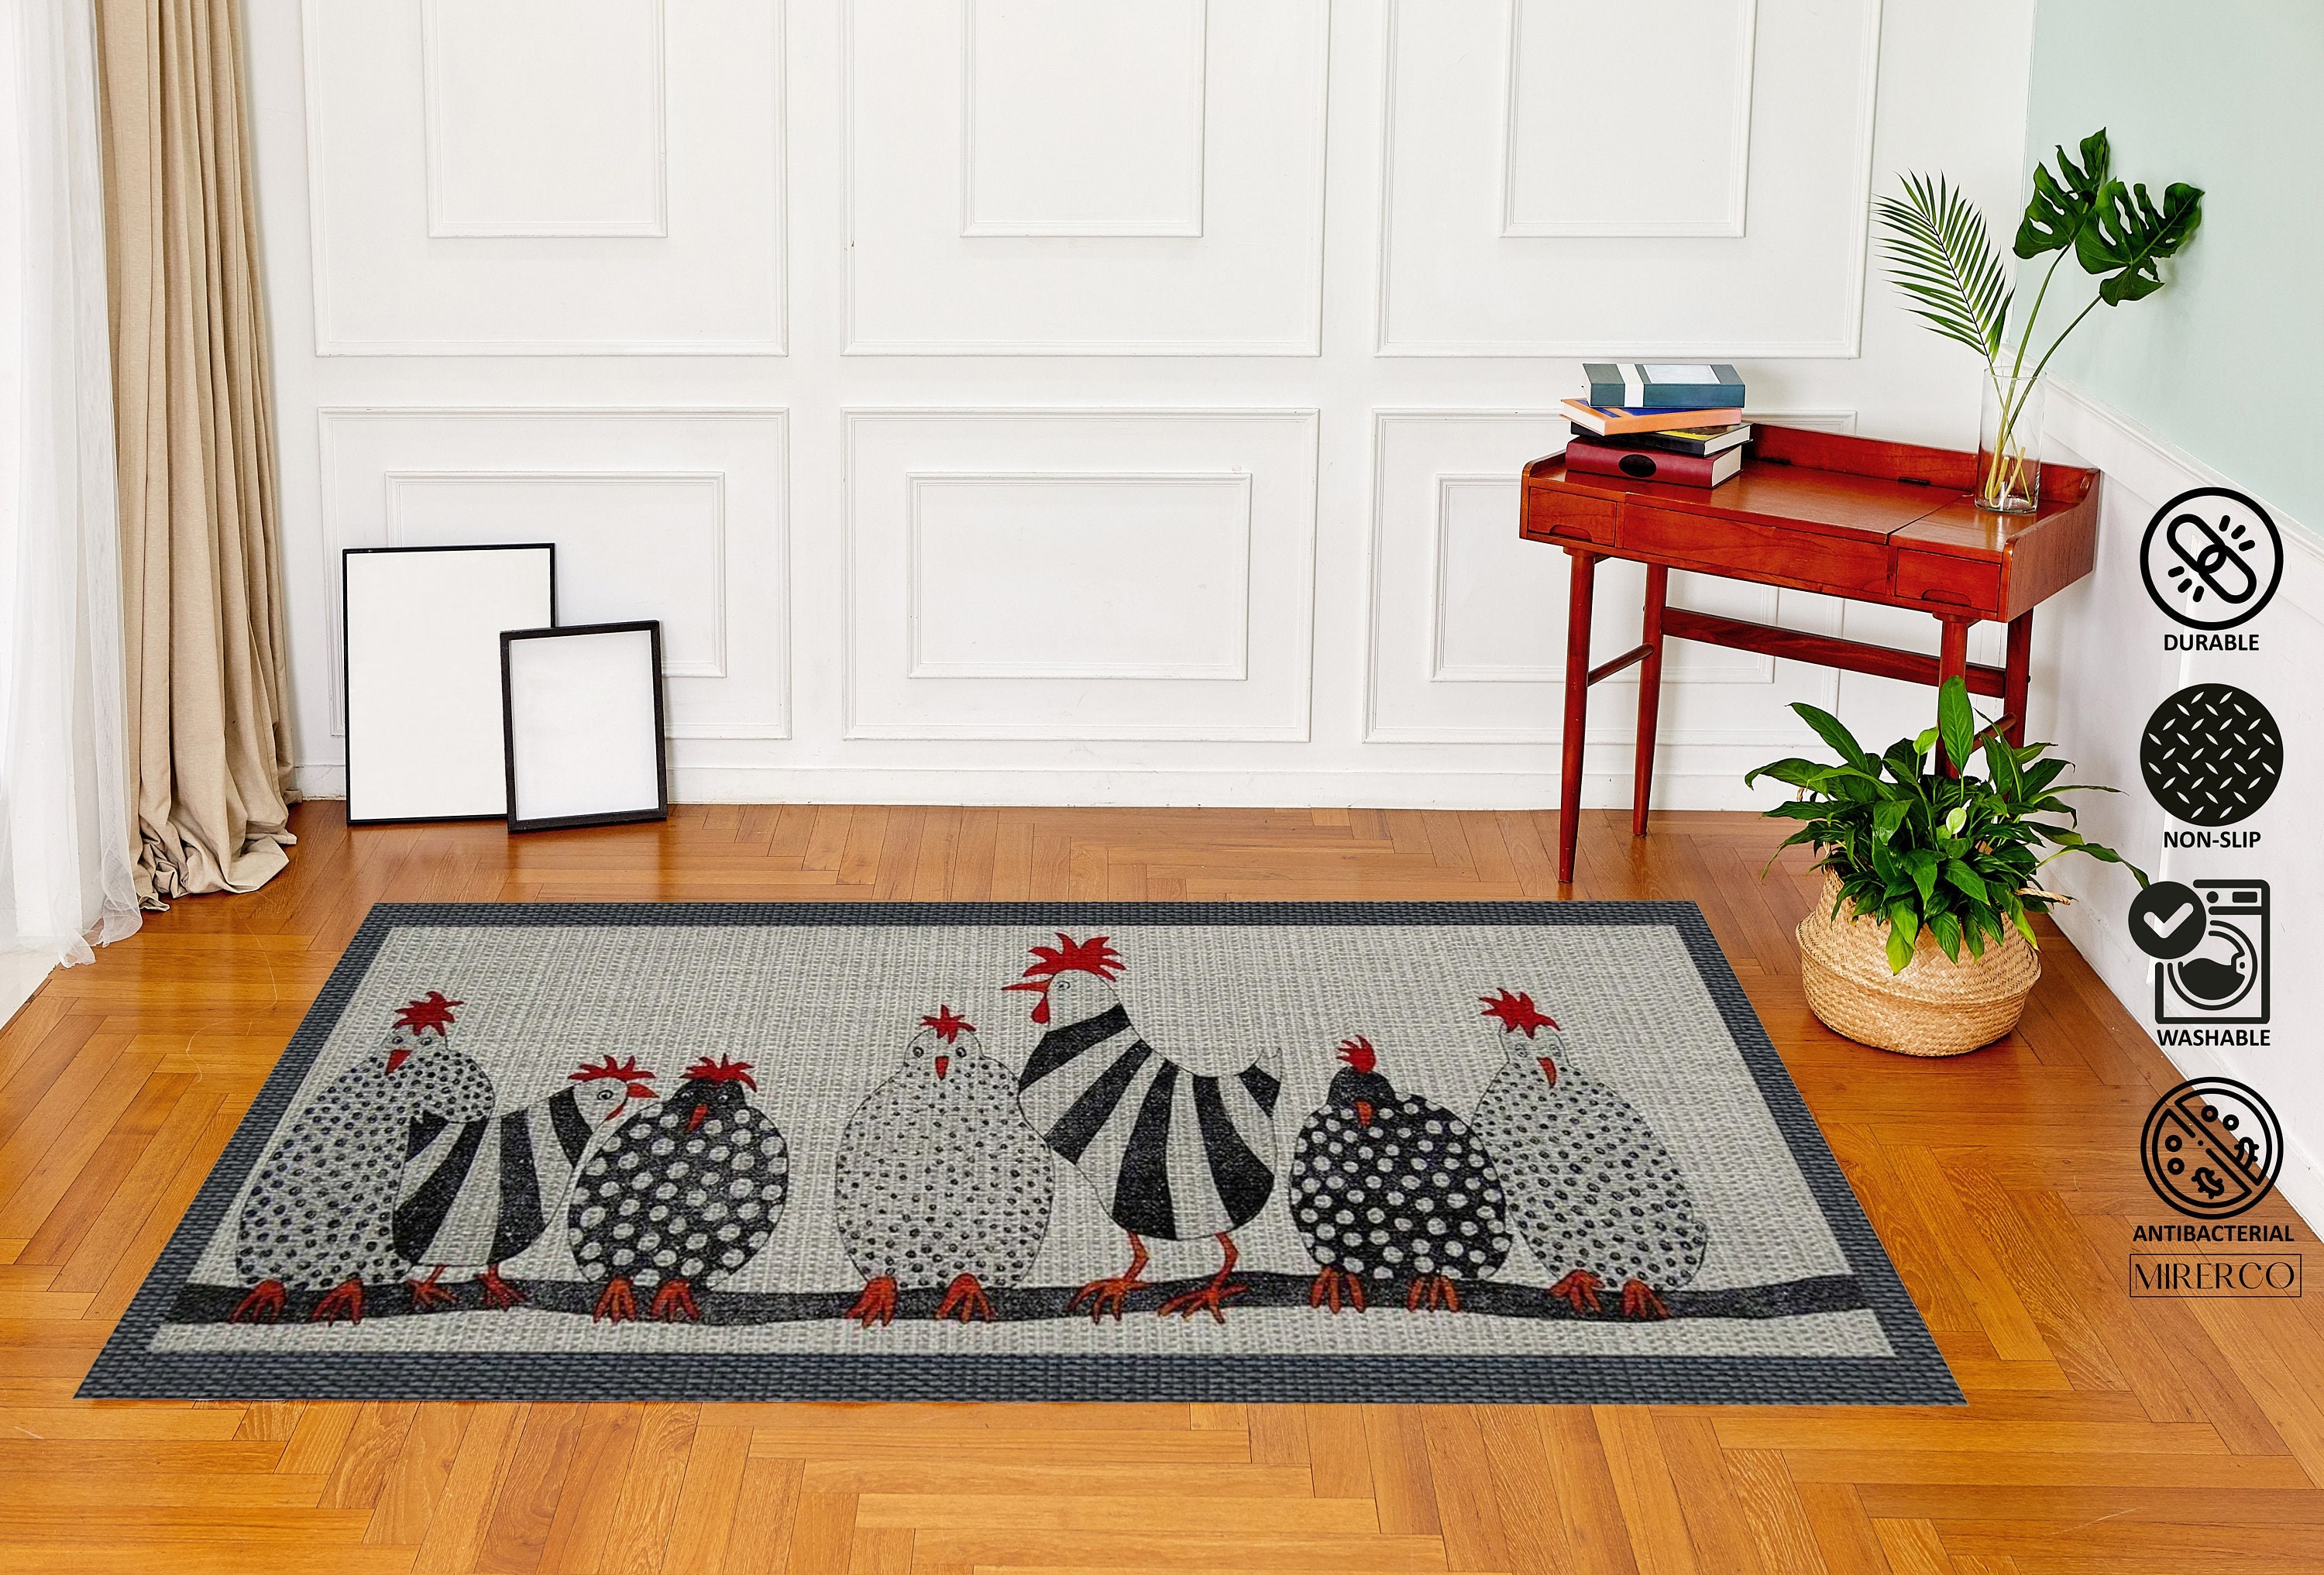  Linen Geometric Rooster Kitchen Rug Kitchen Mat Set of 2,  Farmhouse Decor for Kitchen Mats Cushioned Anti Fatigue 2 Piece Set and  Chicken Kitchen Mat for Home Kitchen Decor or Office